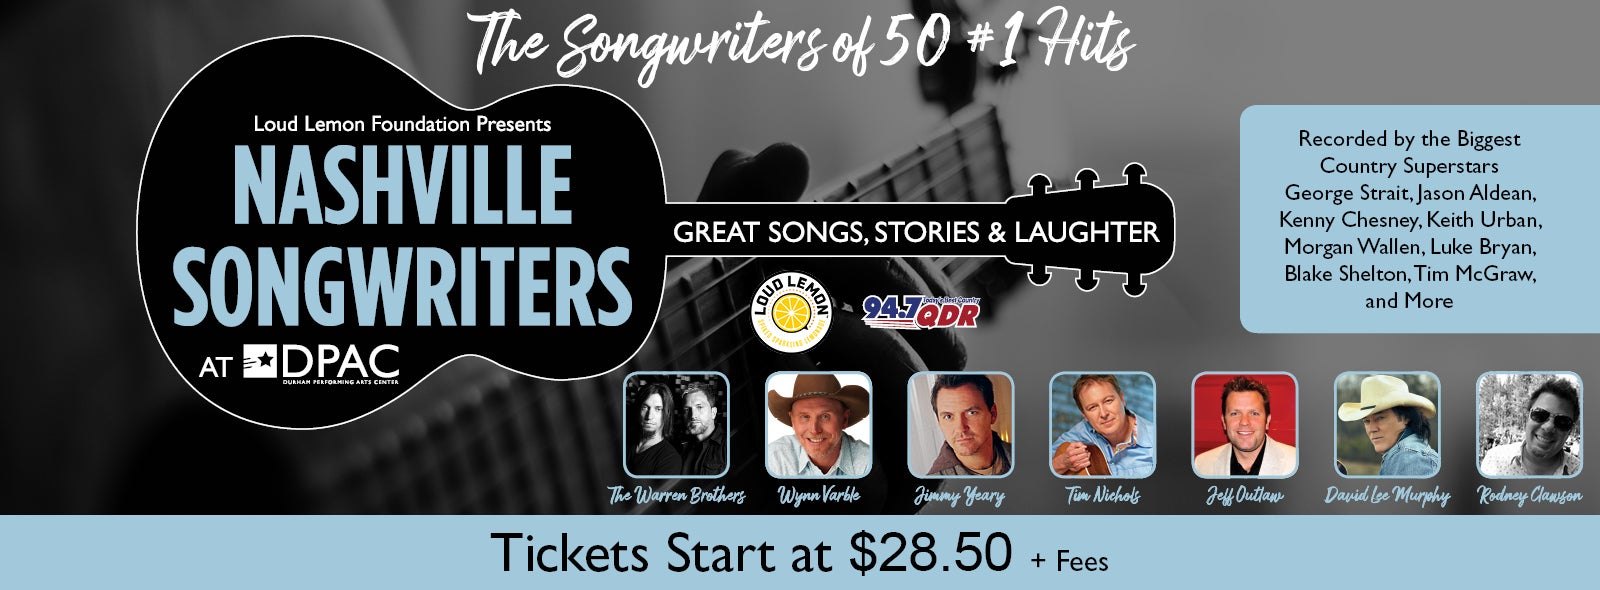 Nashville Songwriters At DPAC